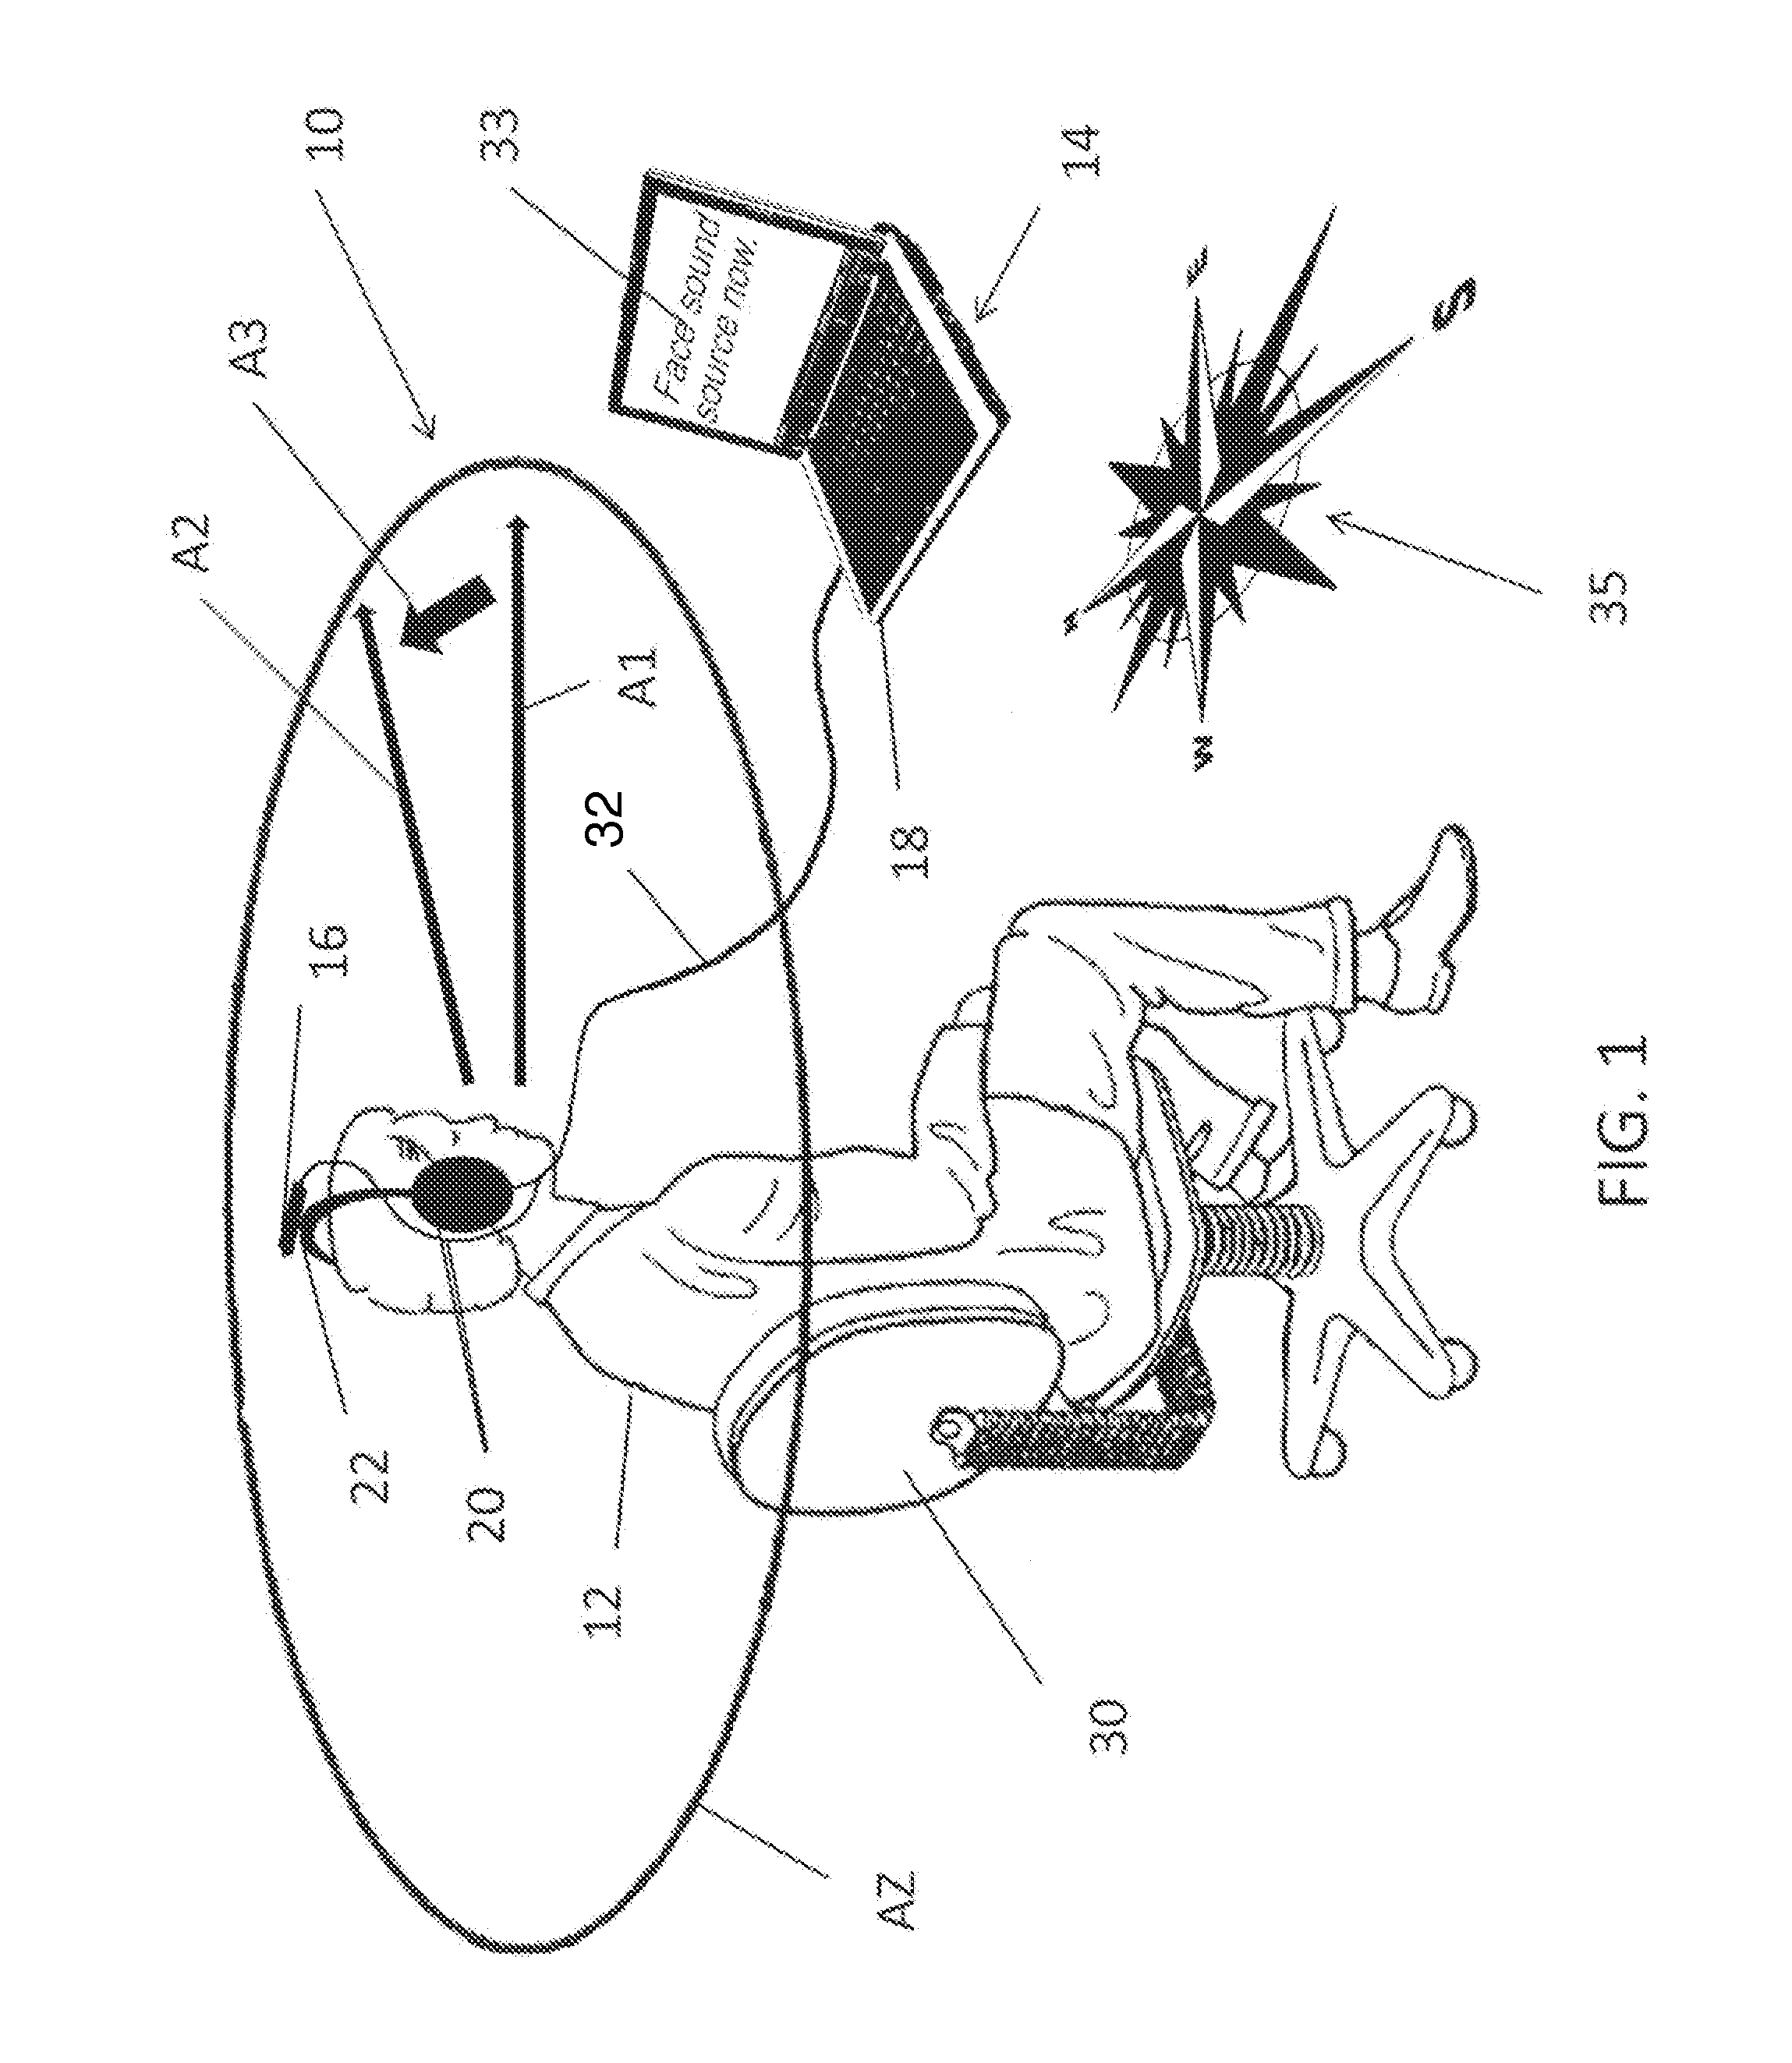 Hearing aids configured for directional acoustic fitting